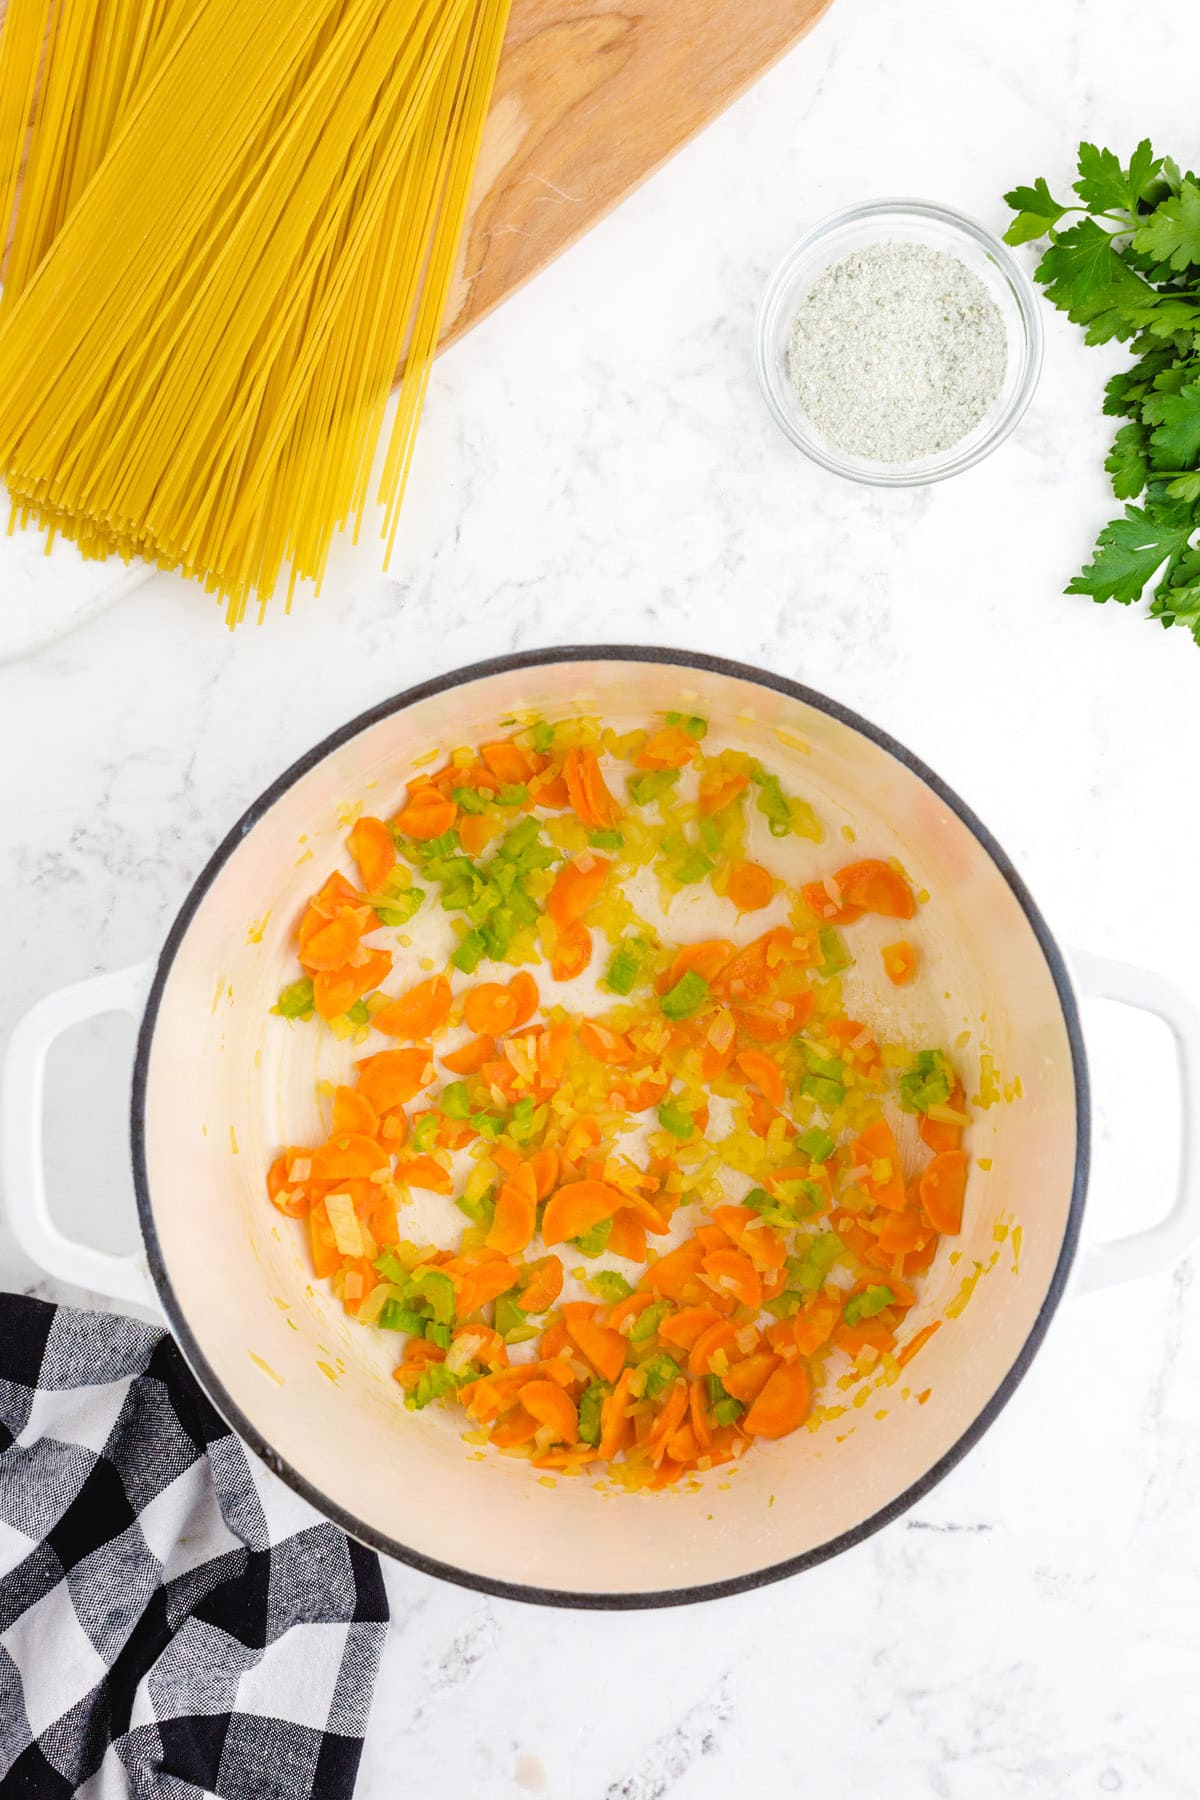 Melt butter and add diced carrots, celery, and onions in a stock pot